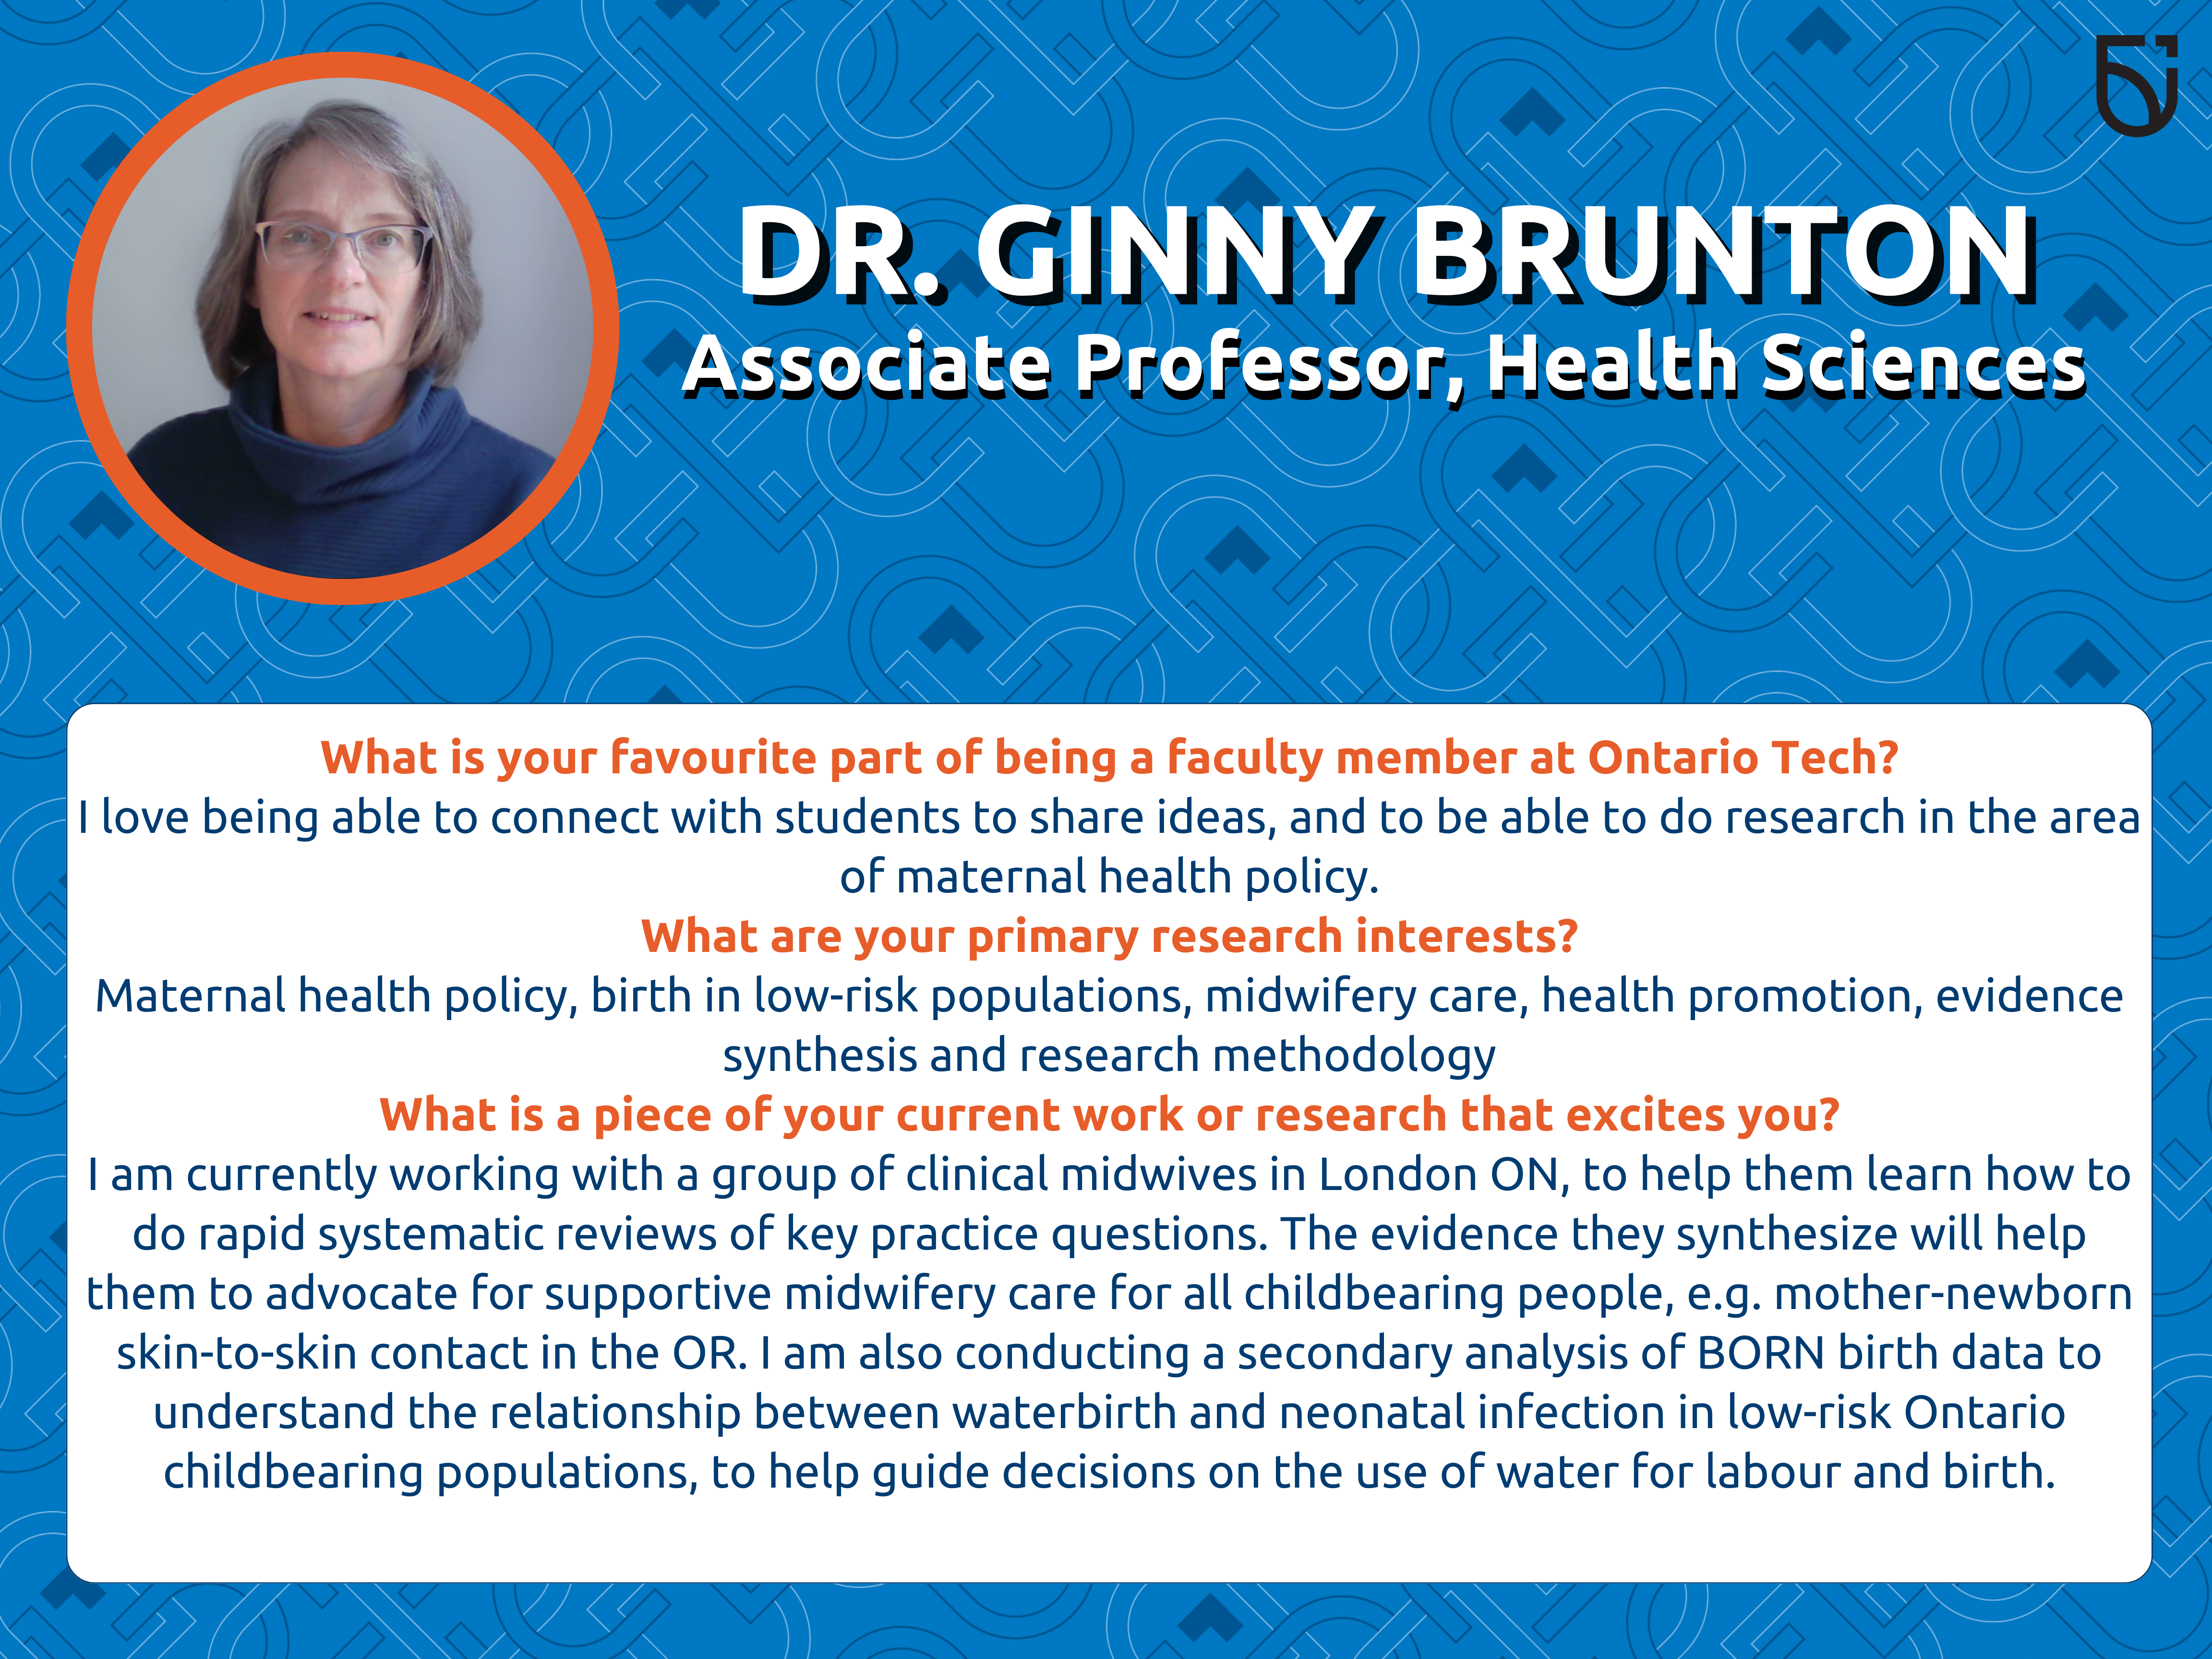 This photo is a Women’s Wednesday feature of Dr. Ginny Brunton, an Associate Professor in the Faculty of Health Sciences